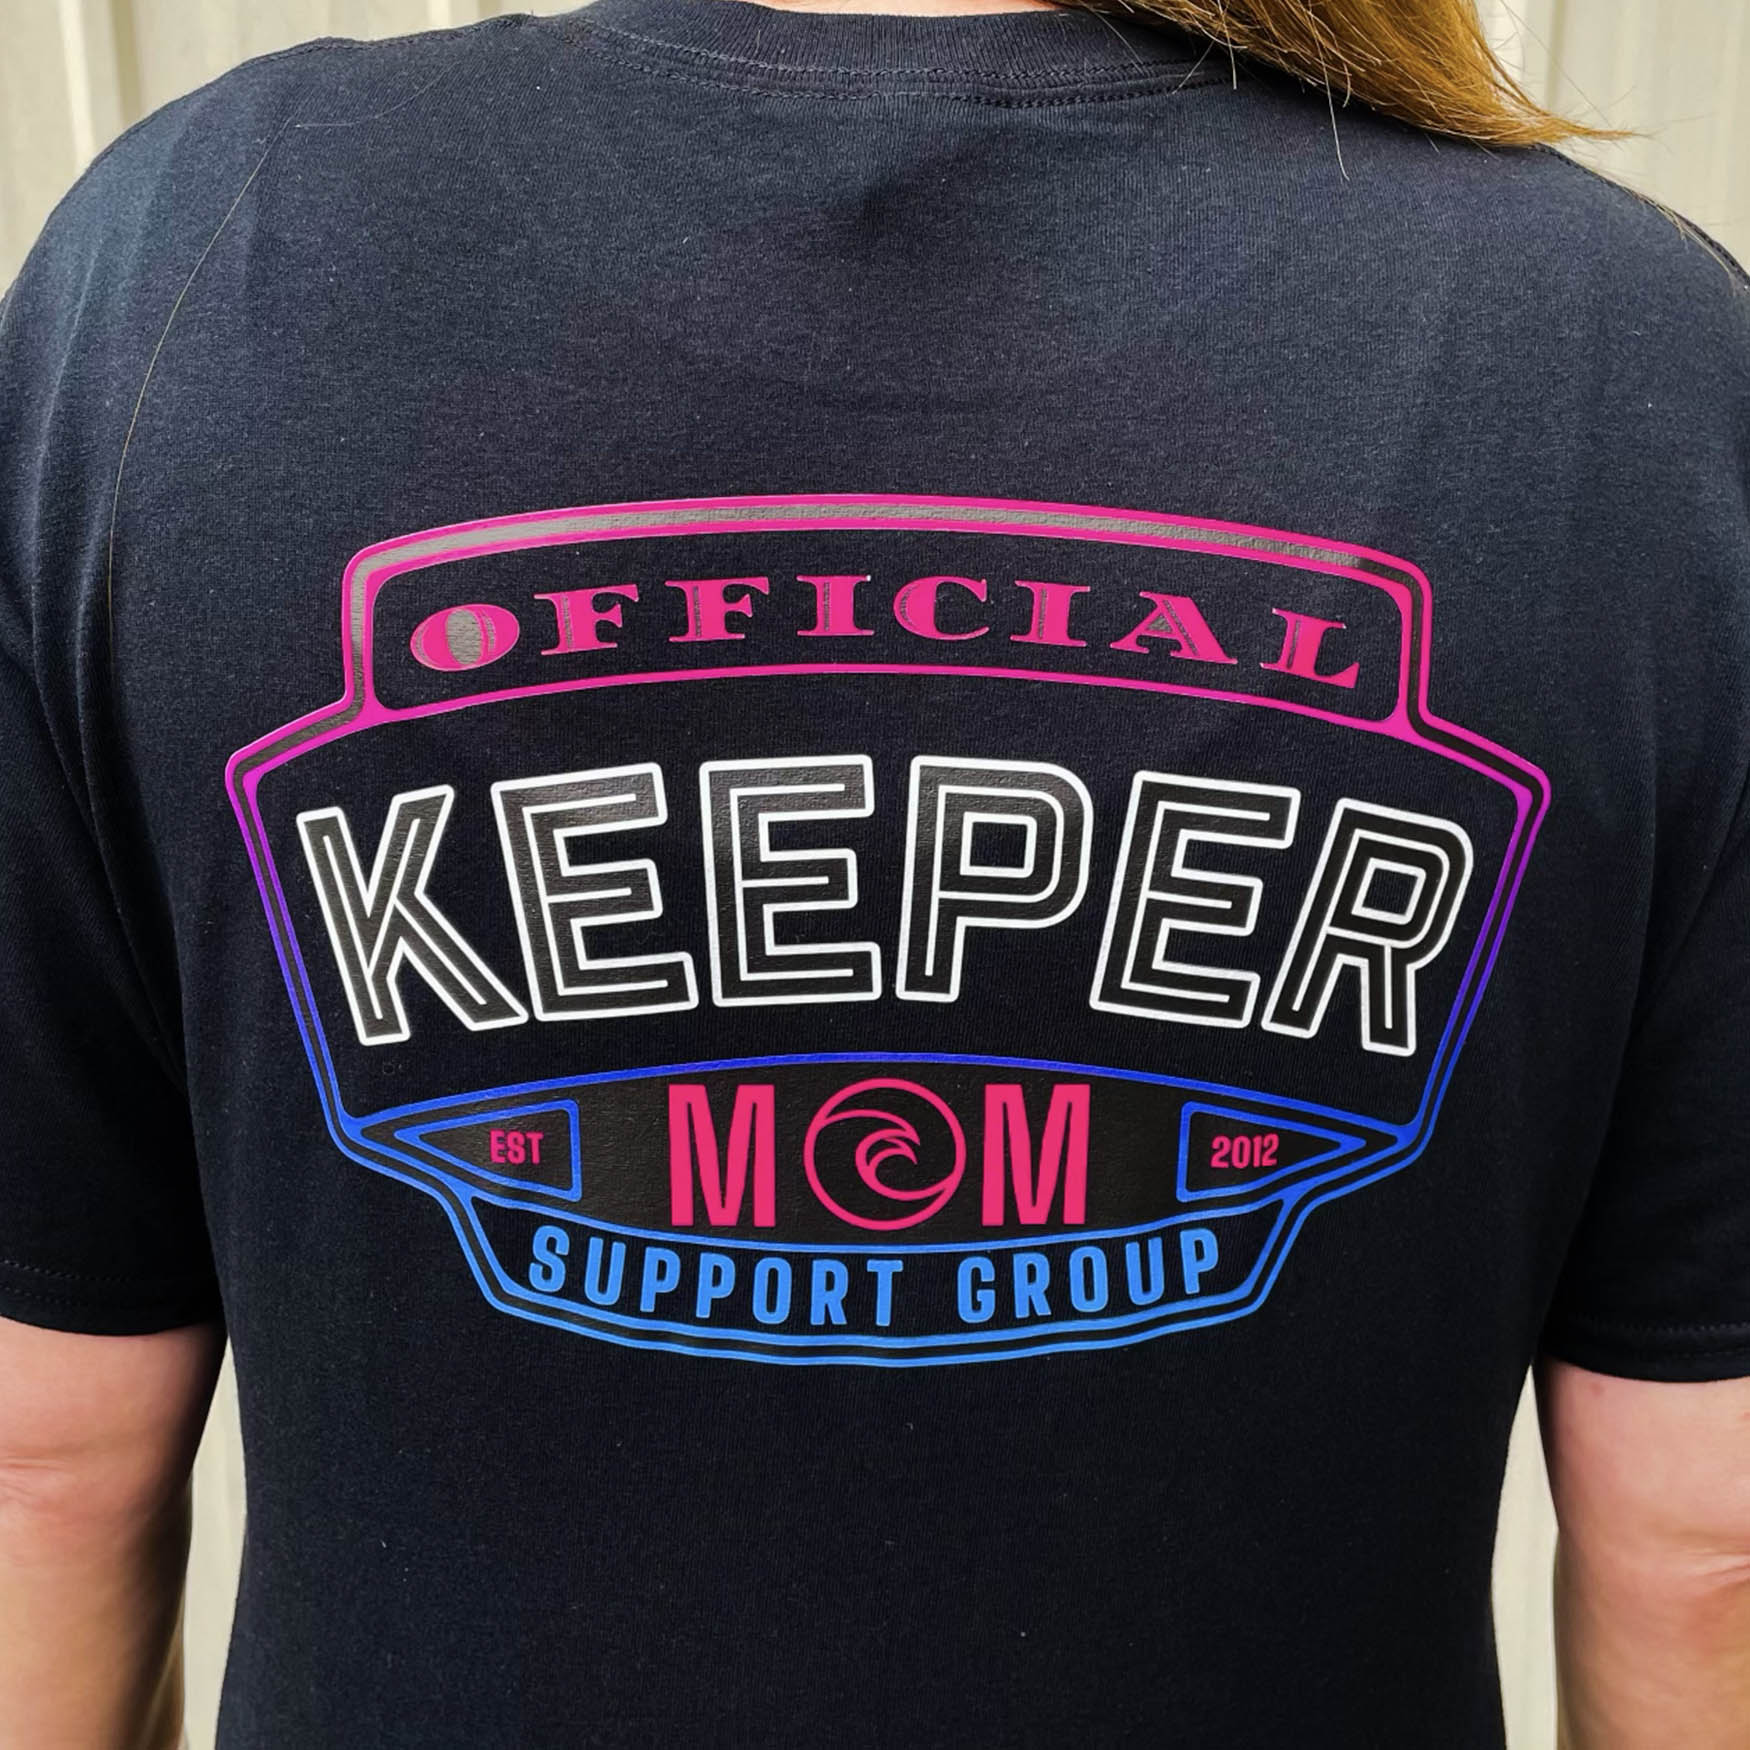 Official Keeper Mom - West Coast